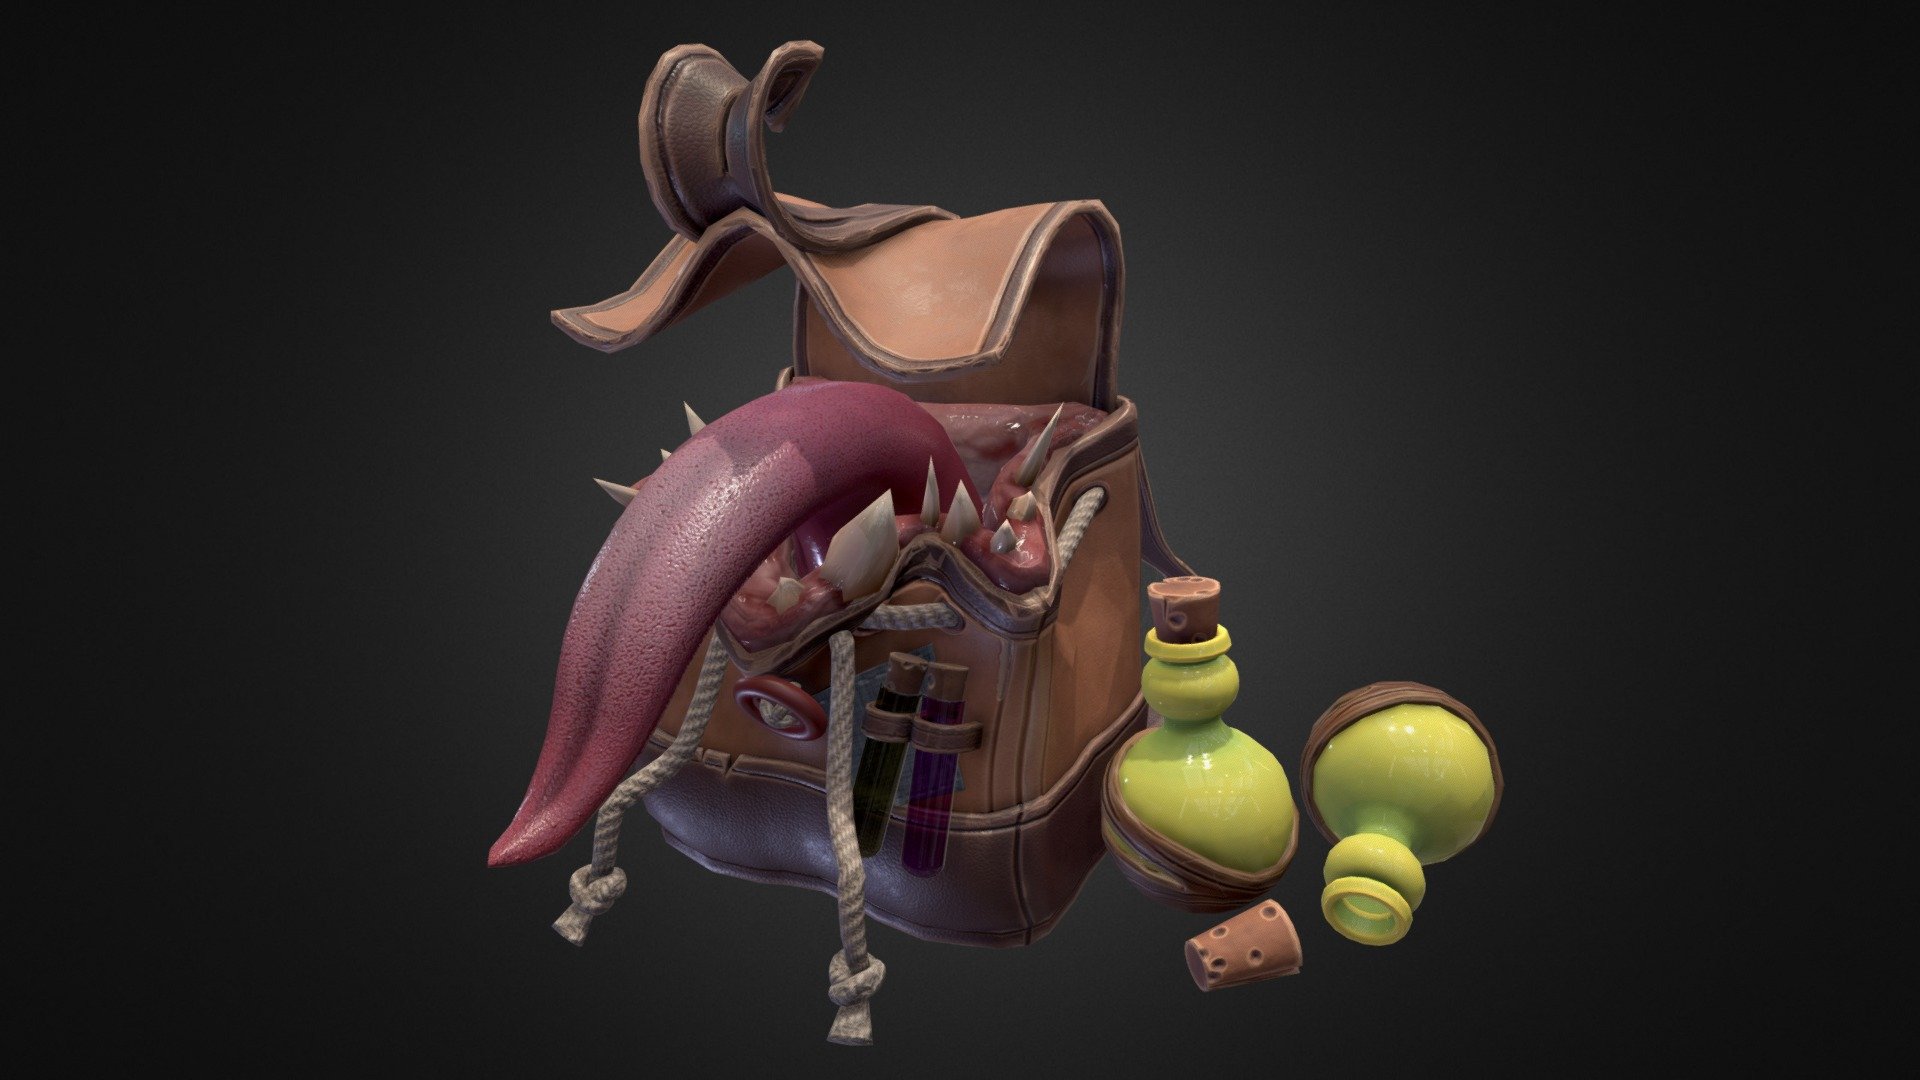 A completely normal backpack - Backpack Mimic - 3D model by Chris (@saltychristopher) 3d model